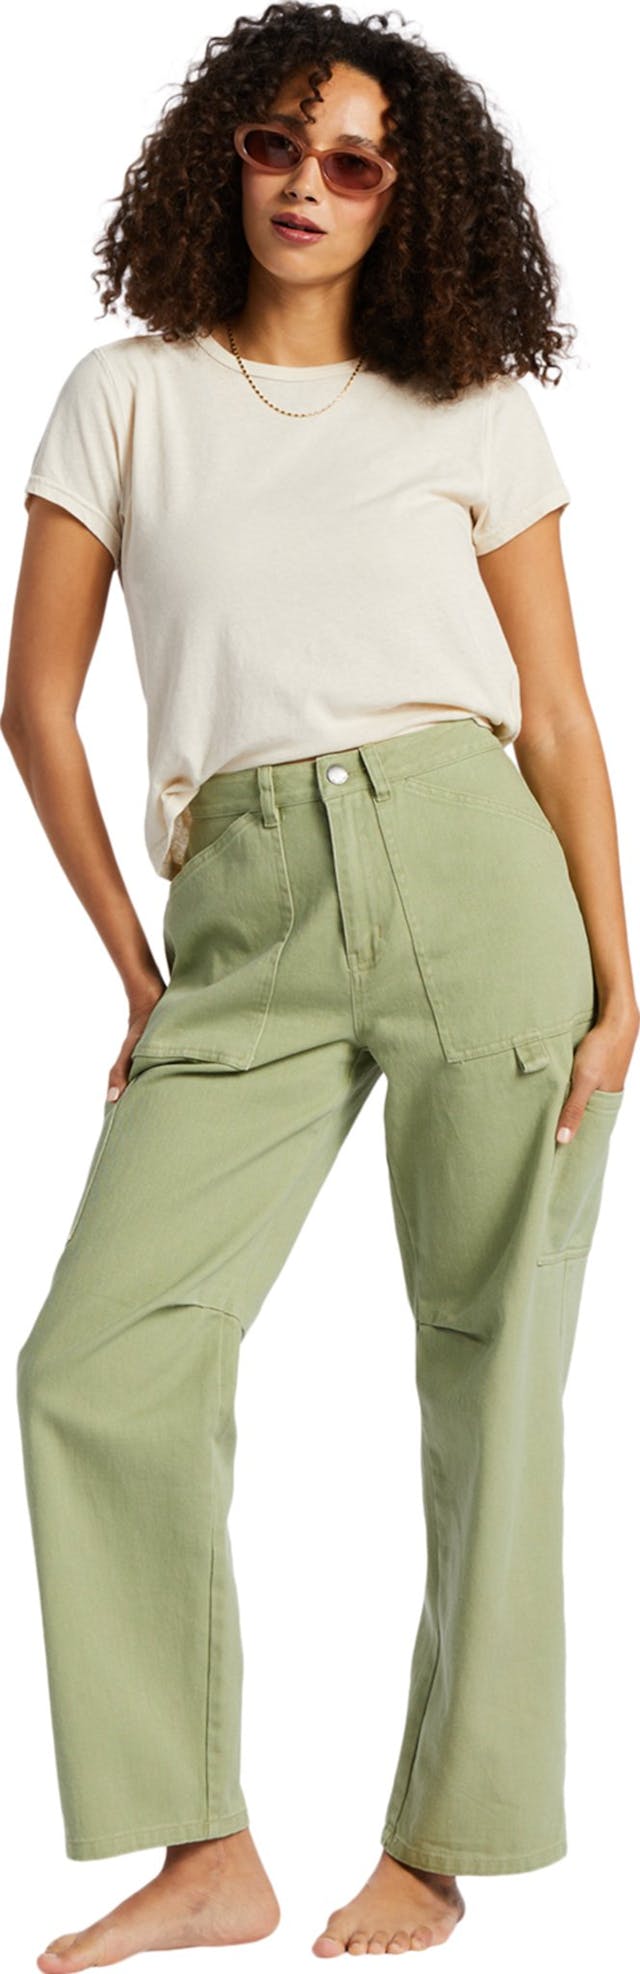 Product image for Leia Jeans - Women's